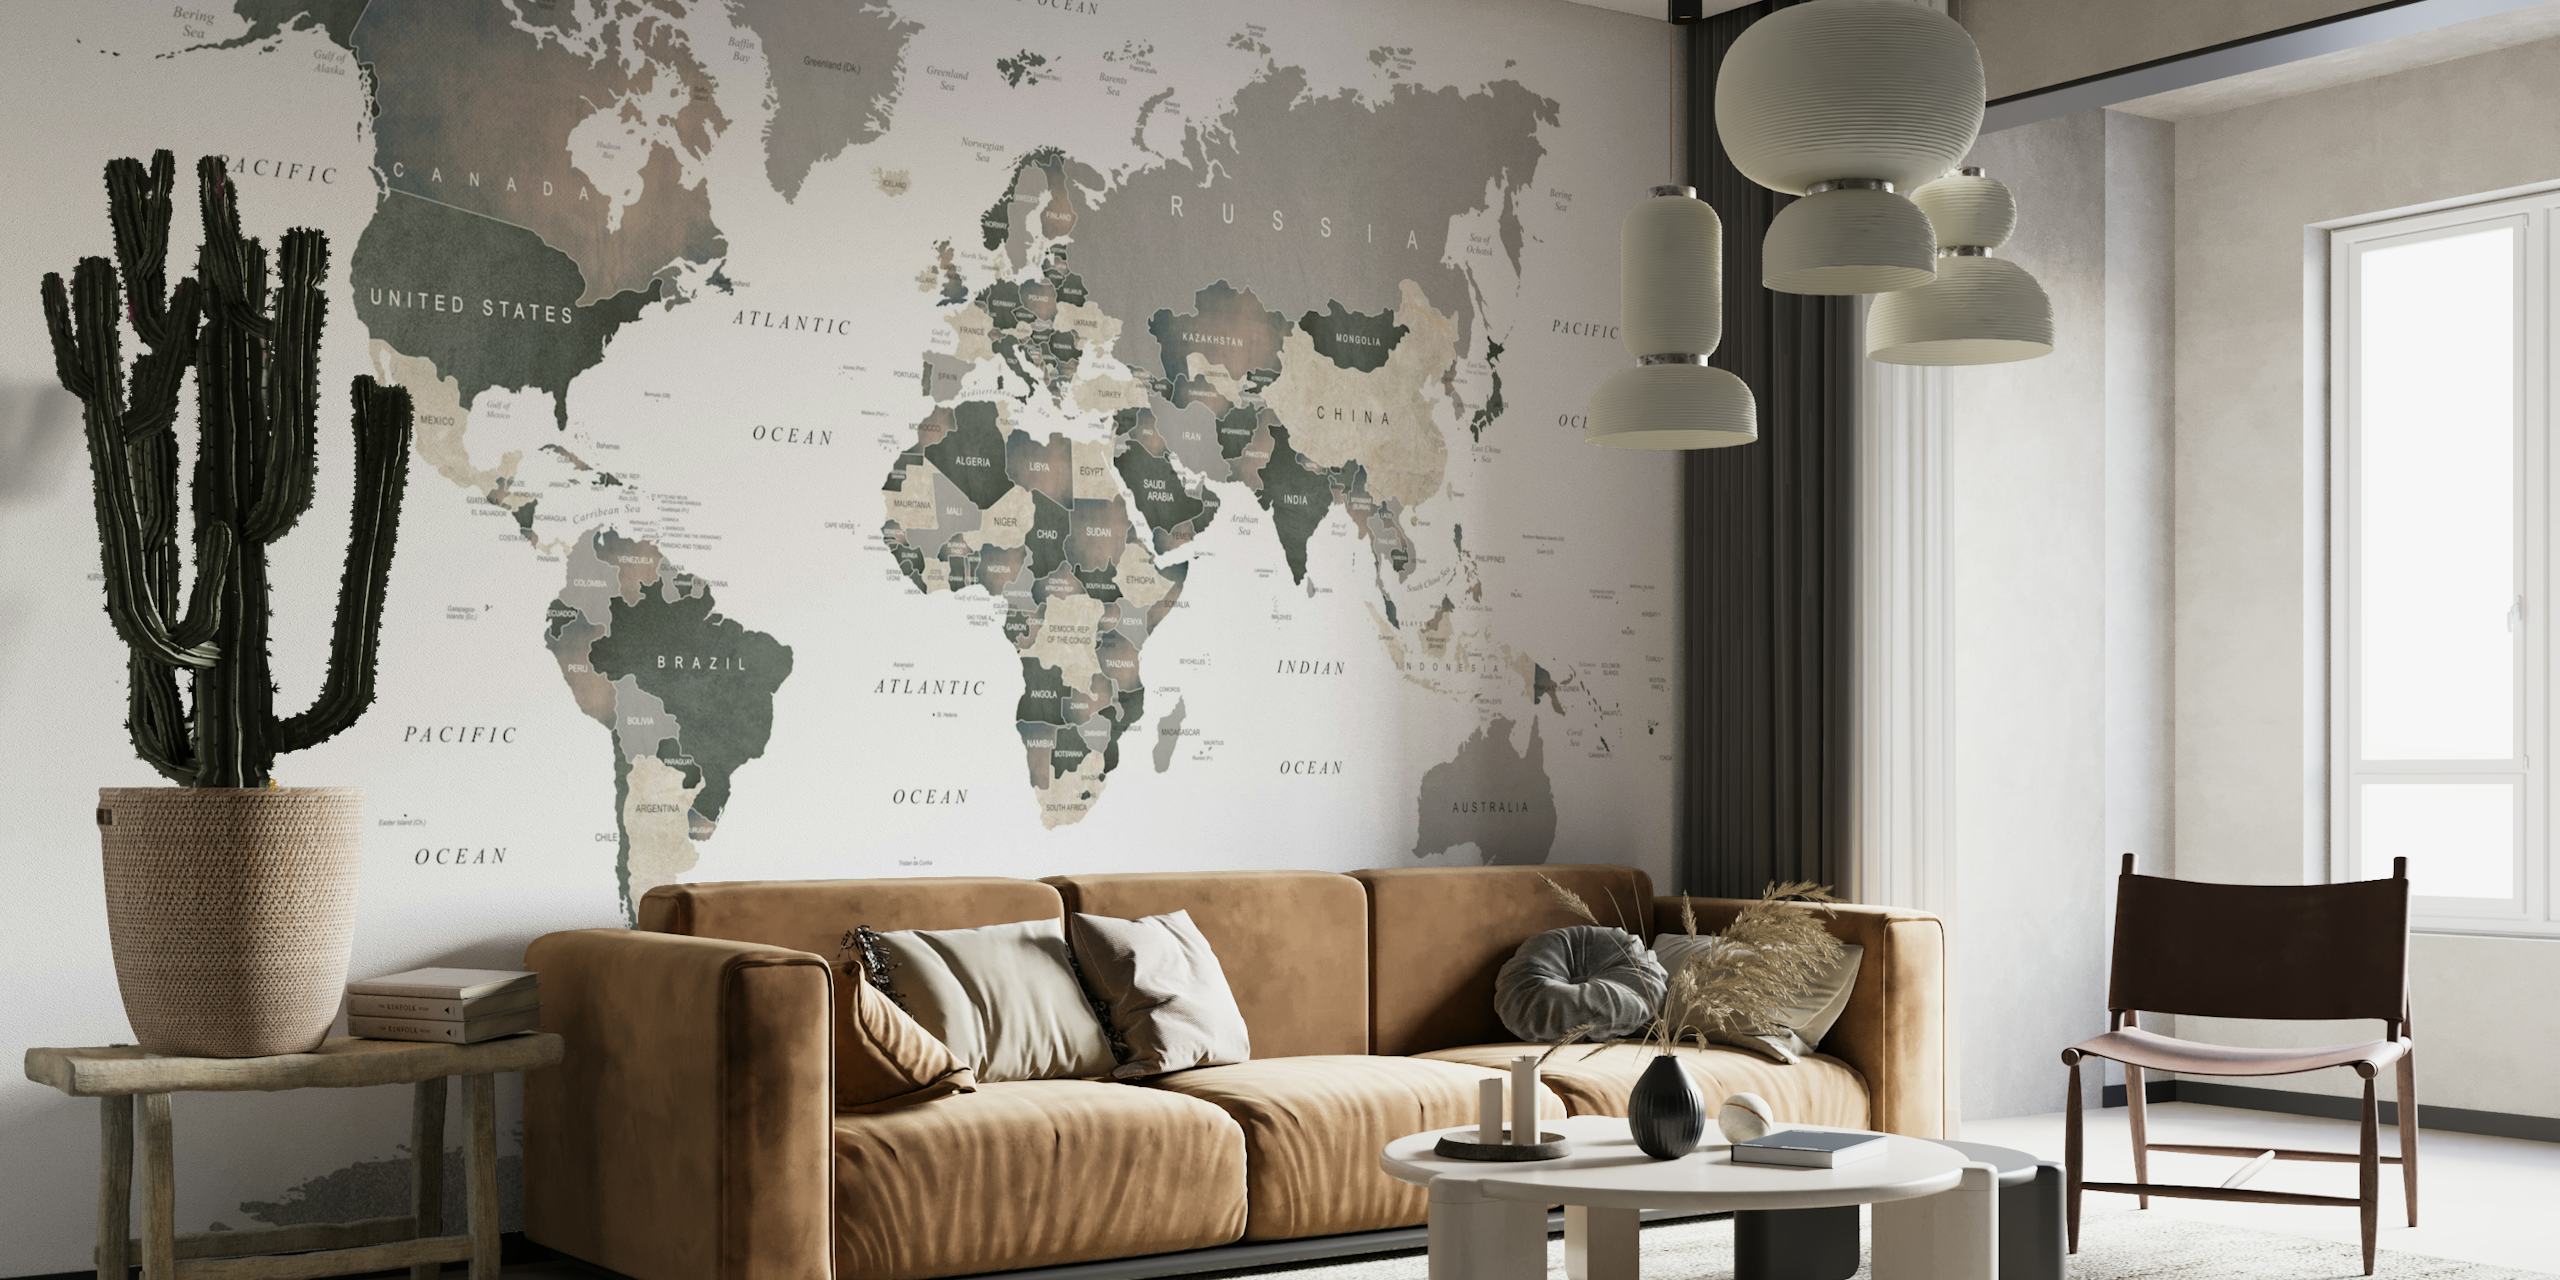 Map of the World Muted Tones papiers peint